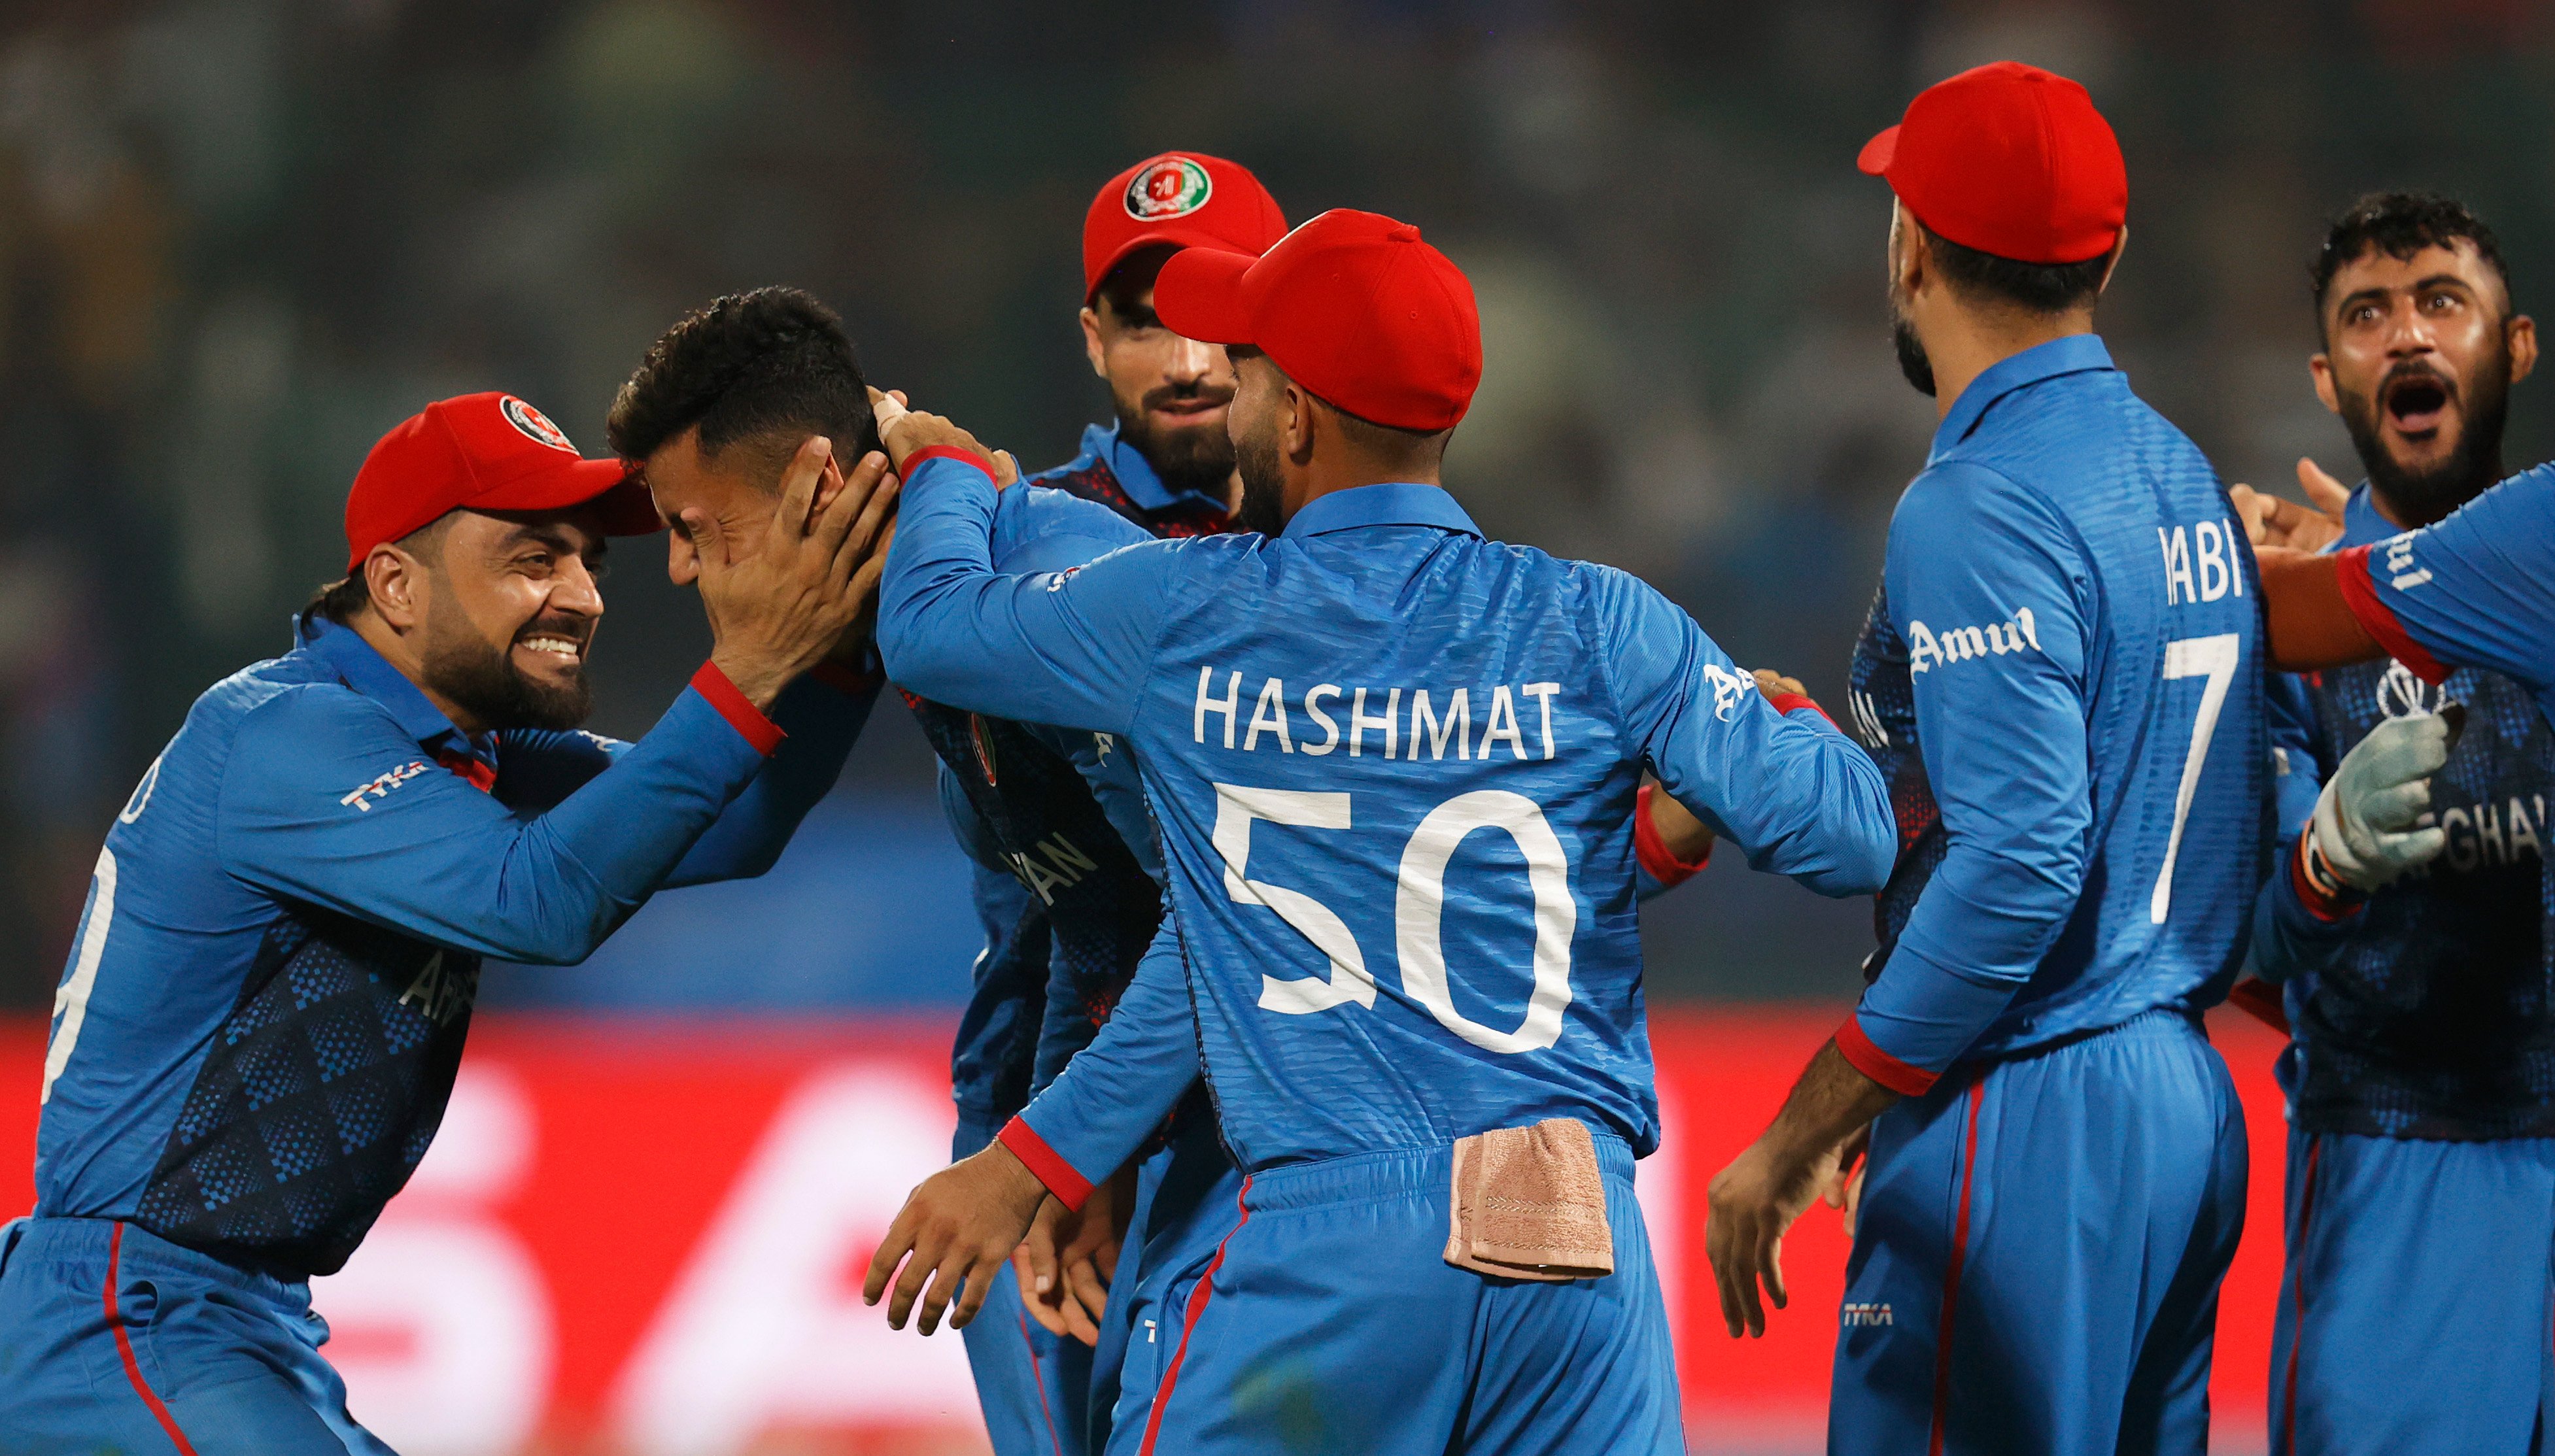 ENG vs AFG | Twitterverse in shock as Afghanistan's bowling masterclass sinks England